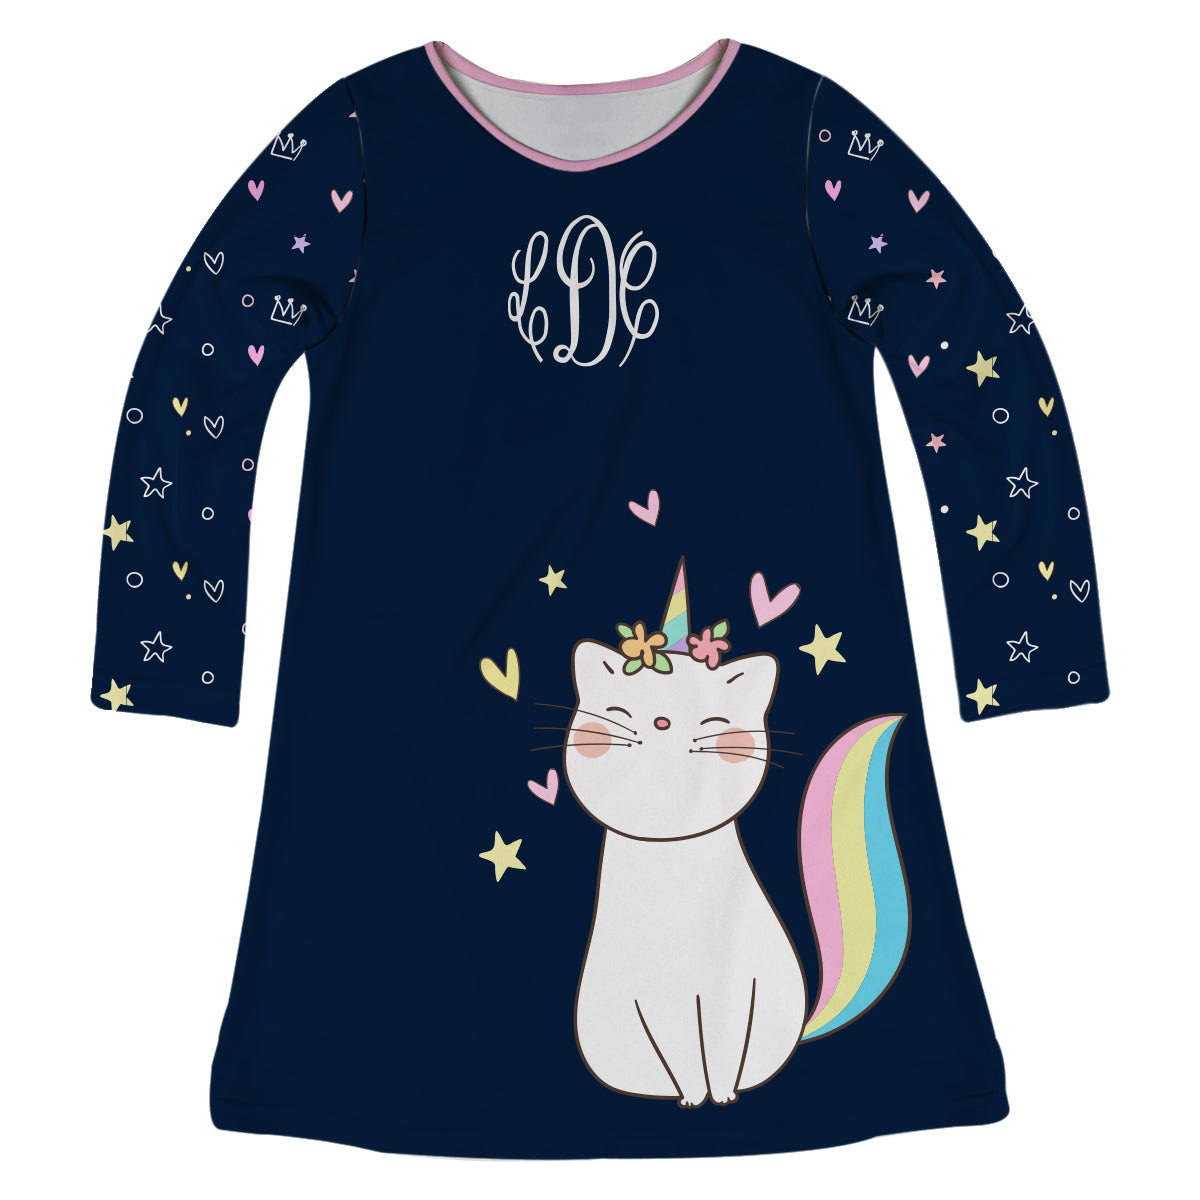 Navy and white cat unicorn girls a line dress with monogram - Wimziy&Co.